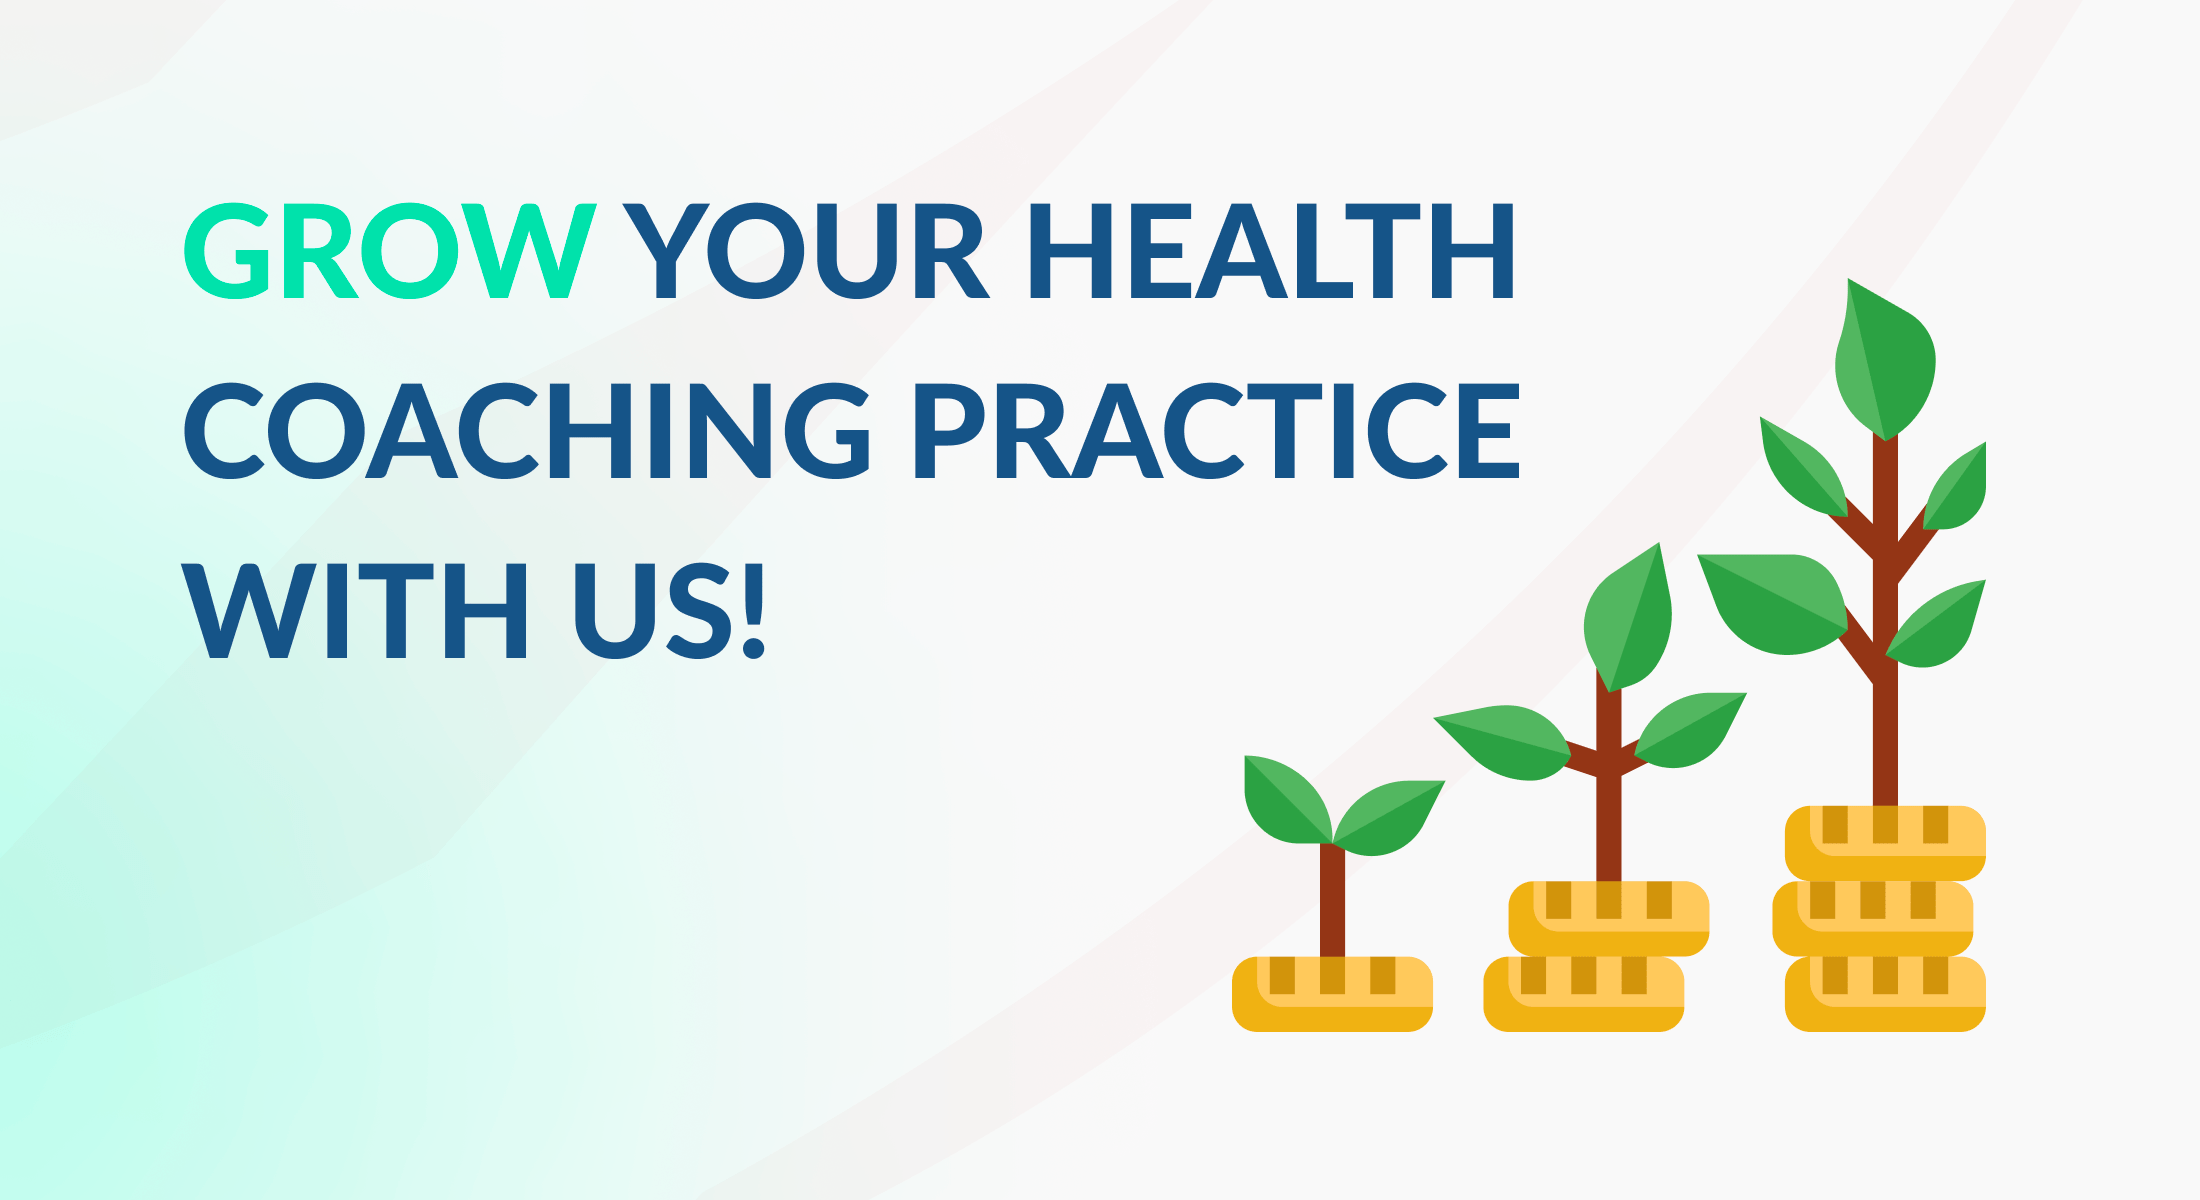 Building Your Health Coaching Practice on the YourCoach Platform